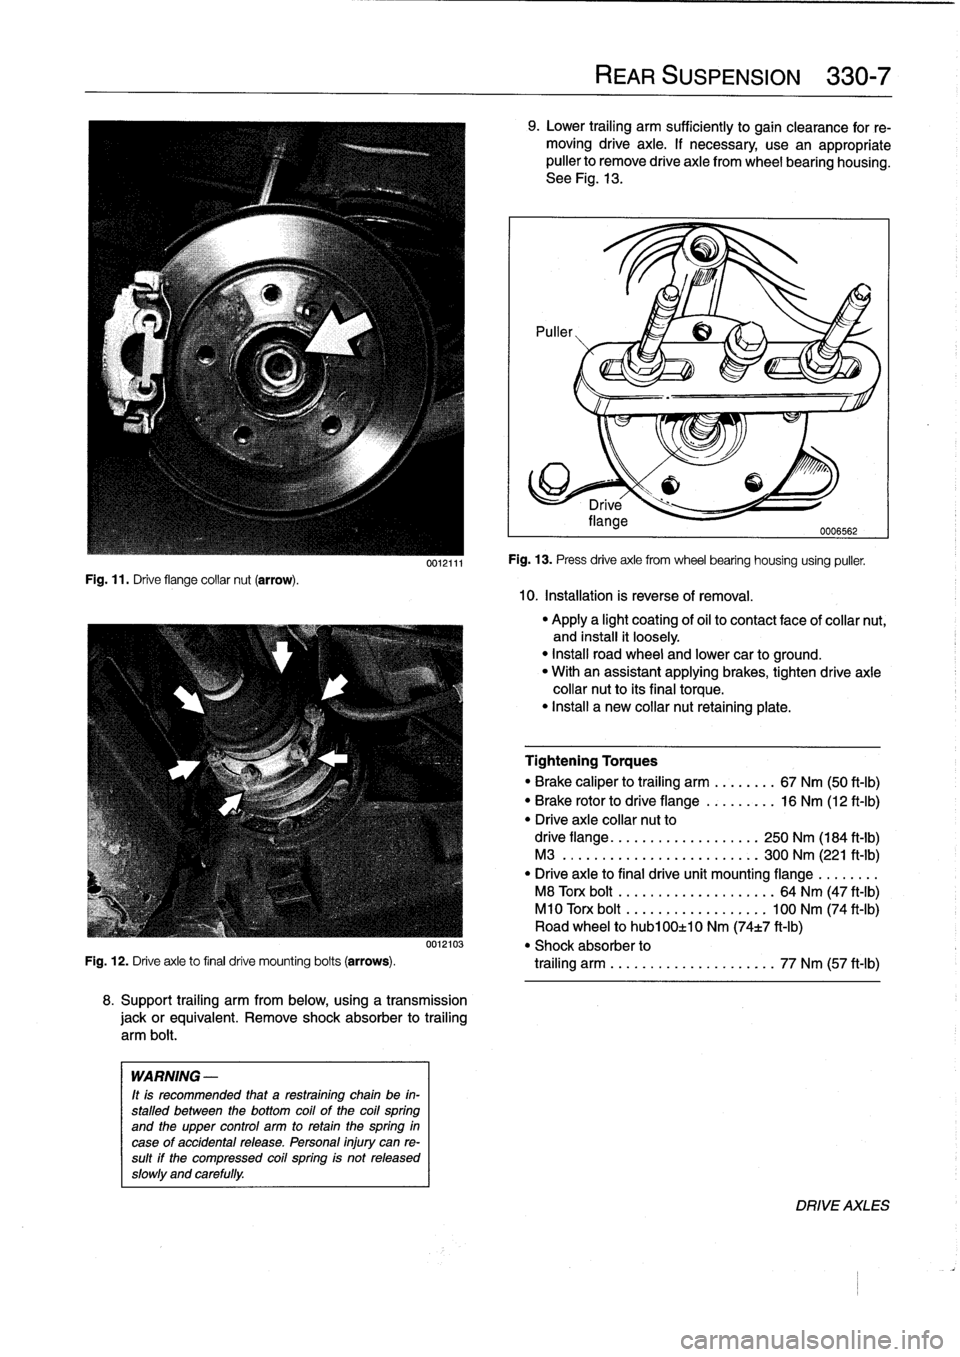 BMW 318i 1995 E36 Owners Guide 
Fig
.
11
.
Drive
flange
collar
nut
(arrow)
.

0012111

8
.
Support
trailing
arm
from
below,
using
a
transmission

jackorequivalent
.
Remove
shock
absorber
to
trailing

arm
bolt
.

WARNING
-

It
is
re